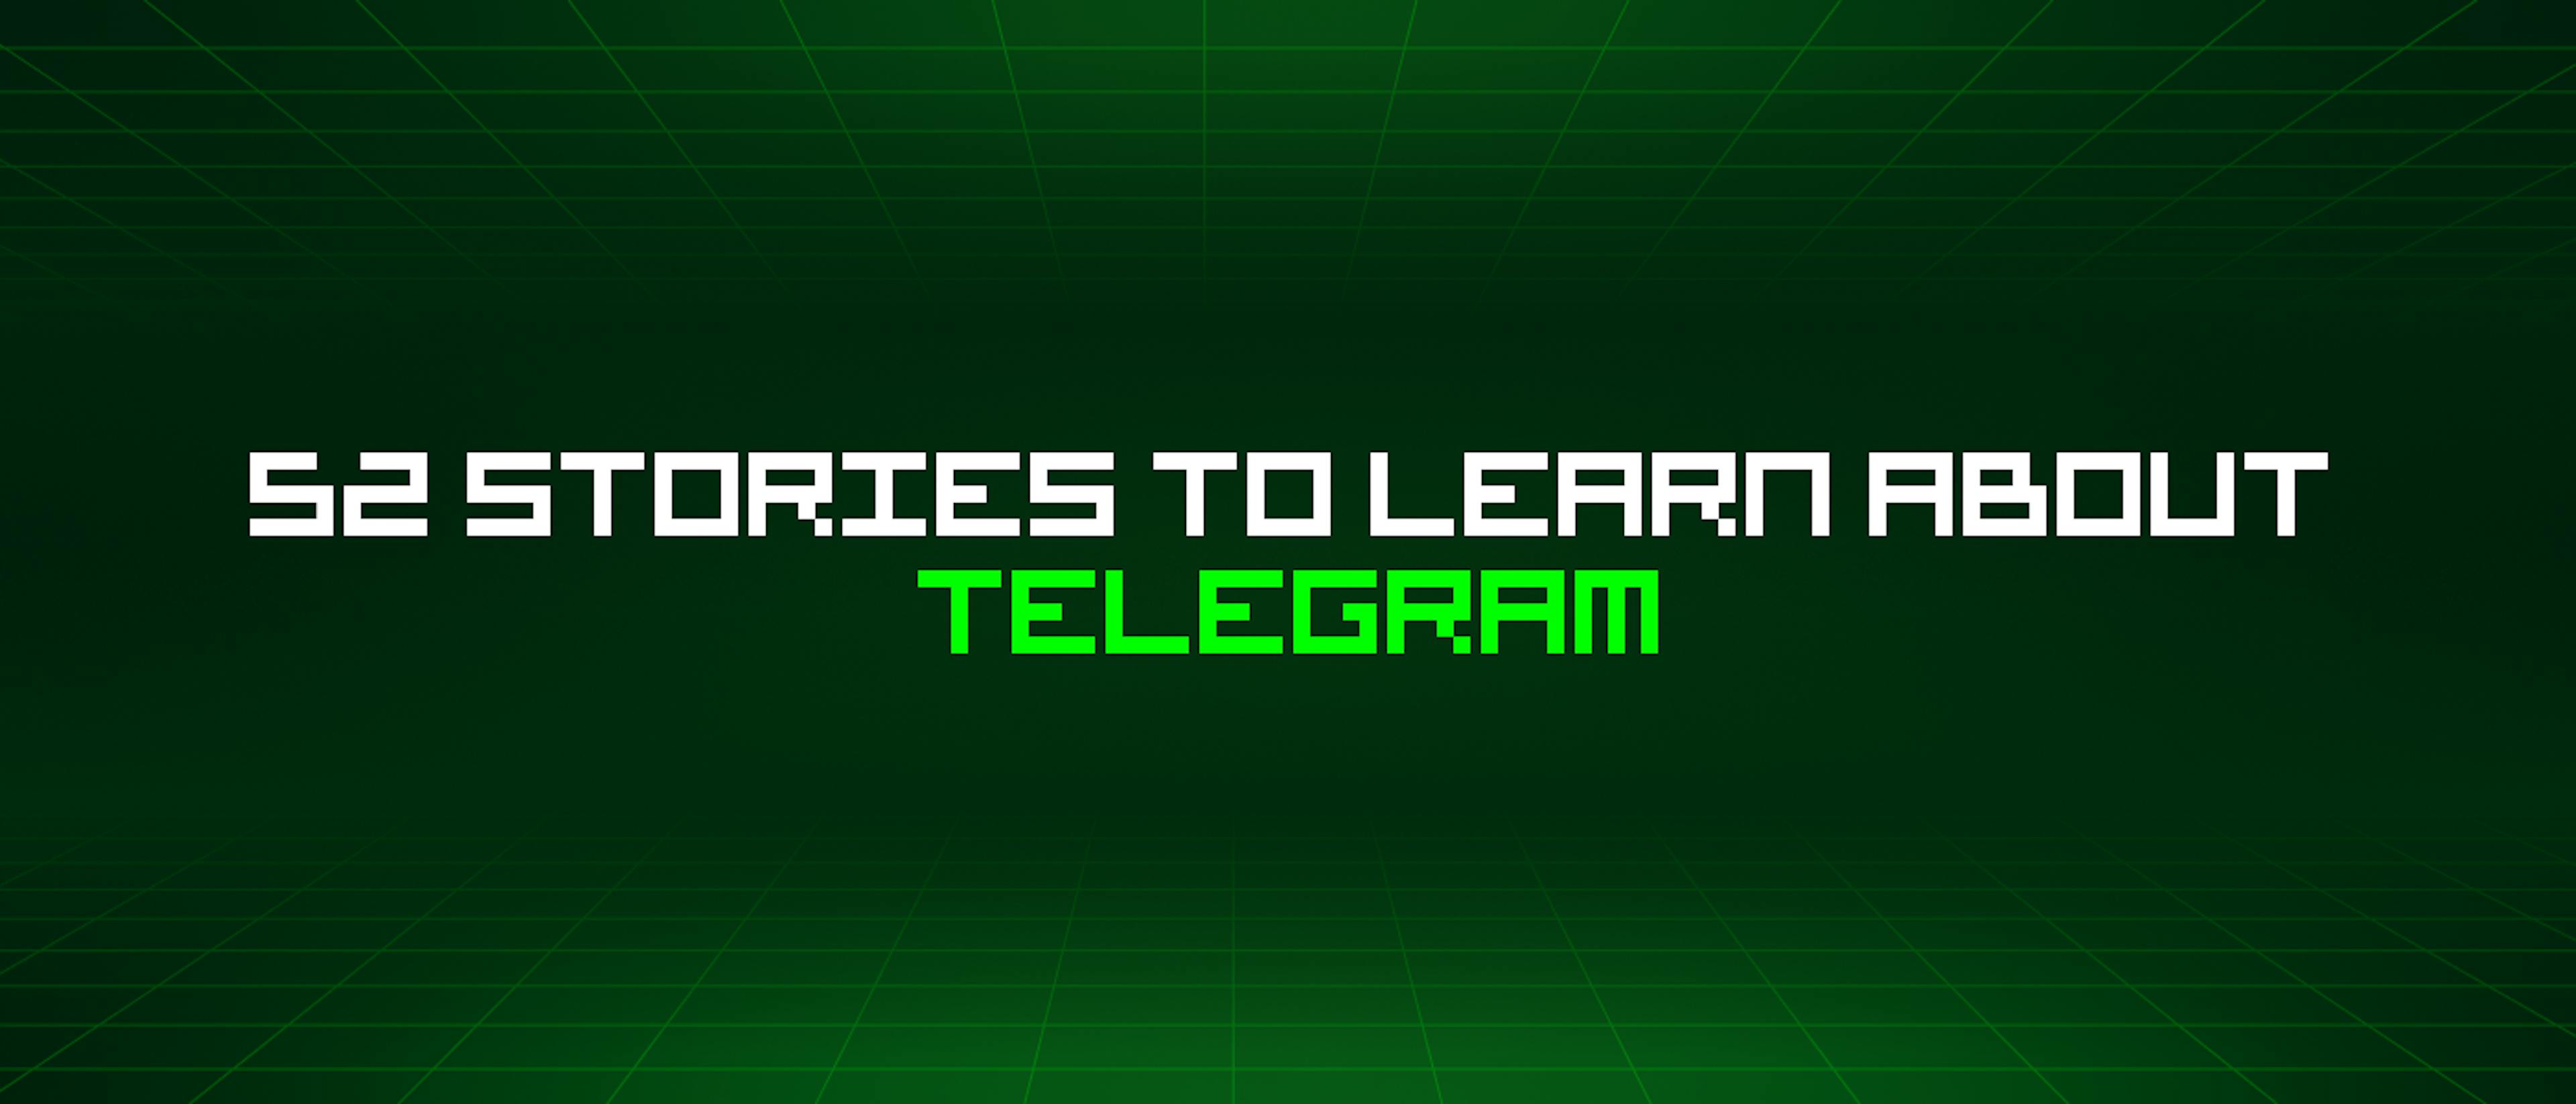 featured image - 52 Stories To Learn About Telegram